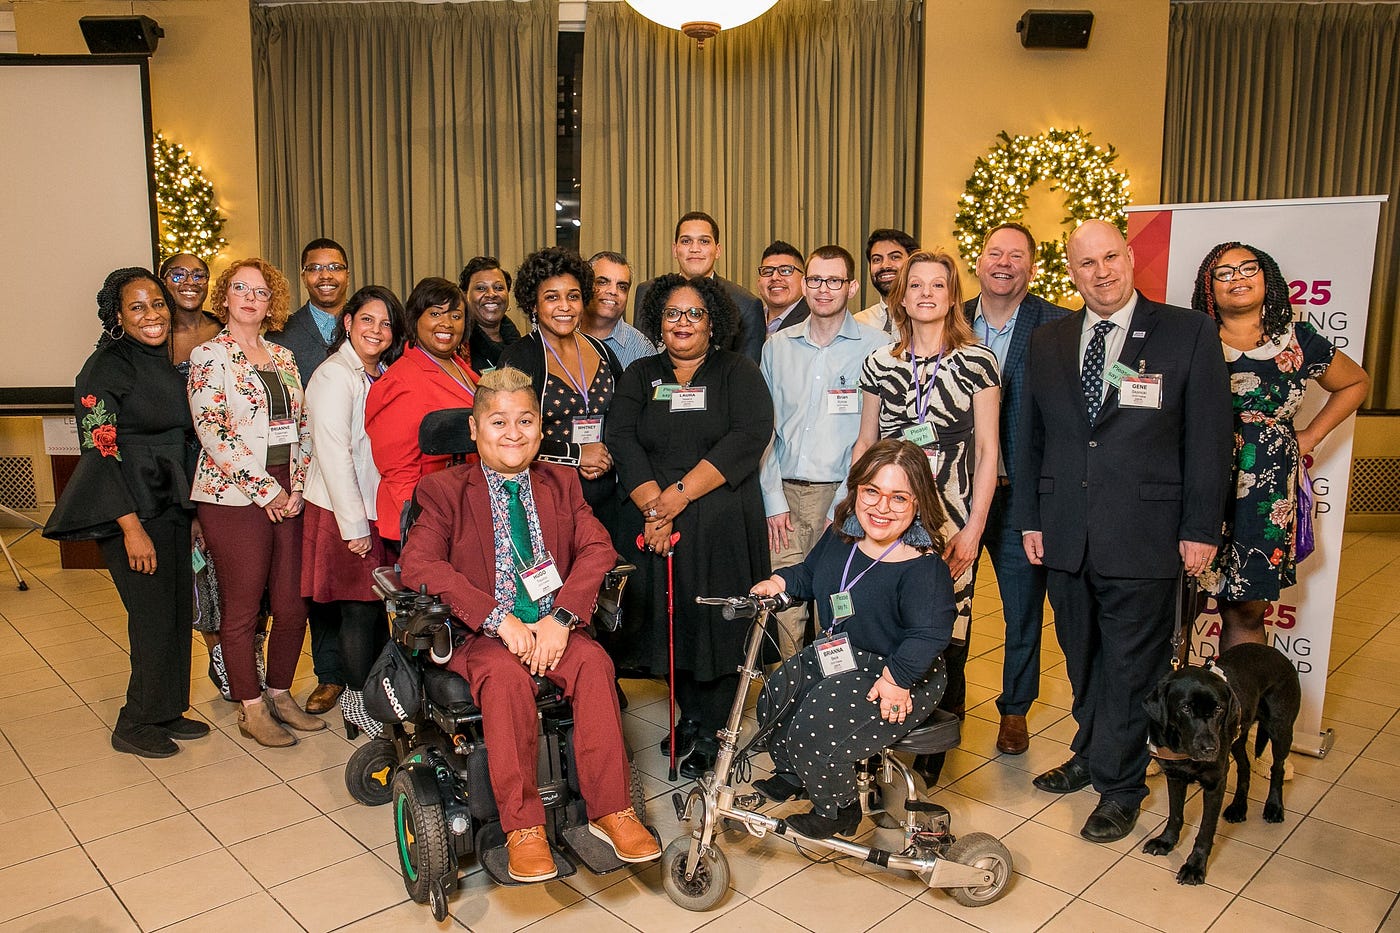 A group photo of about 20 people with visible and invisible disabilities pose with State Senator Robert Peters.